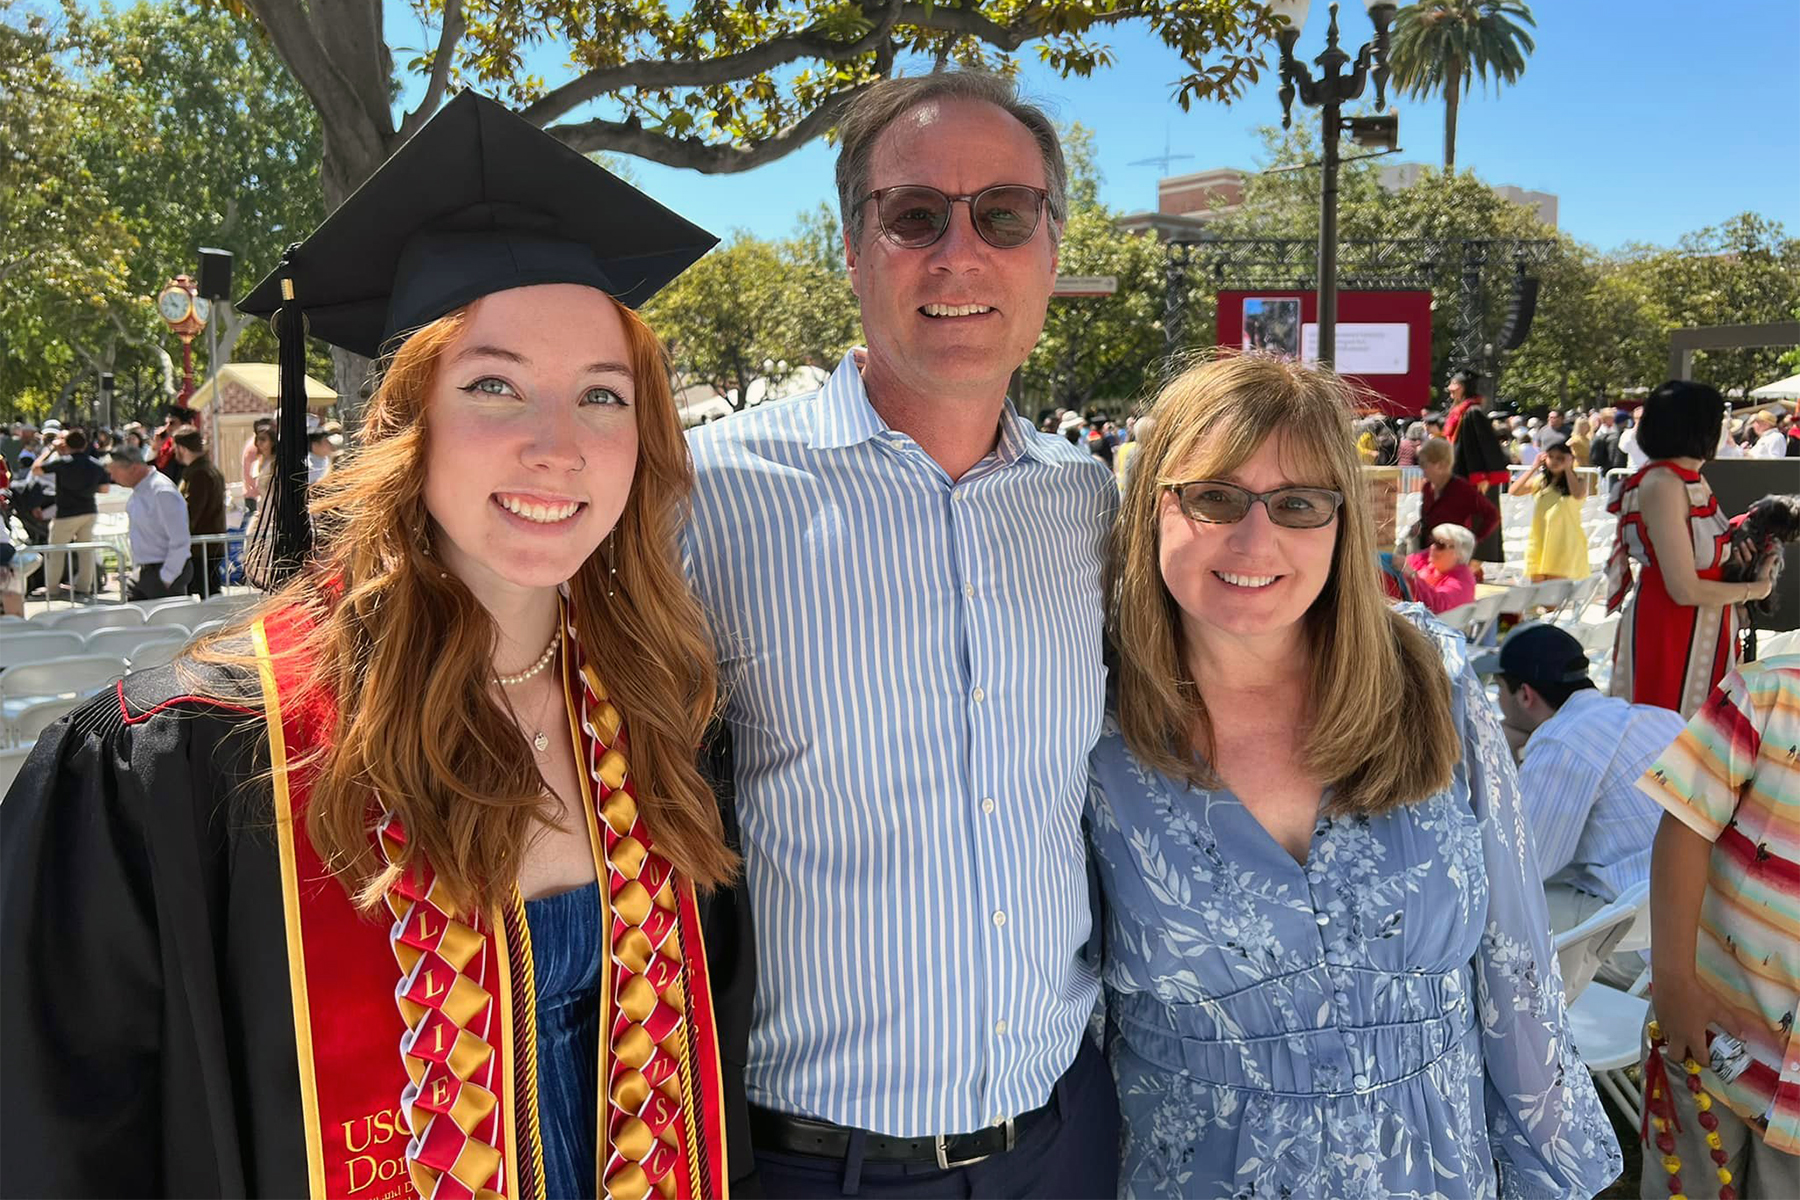 USC 2022 commencement: Rupp family